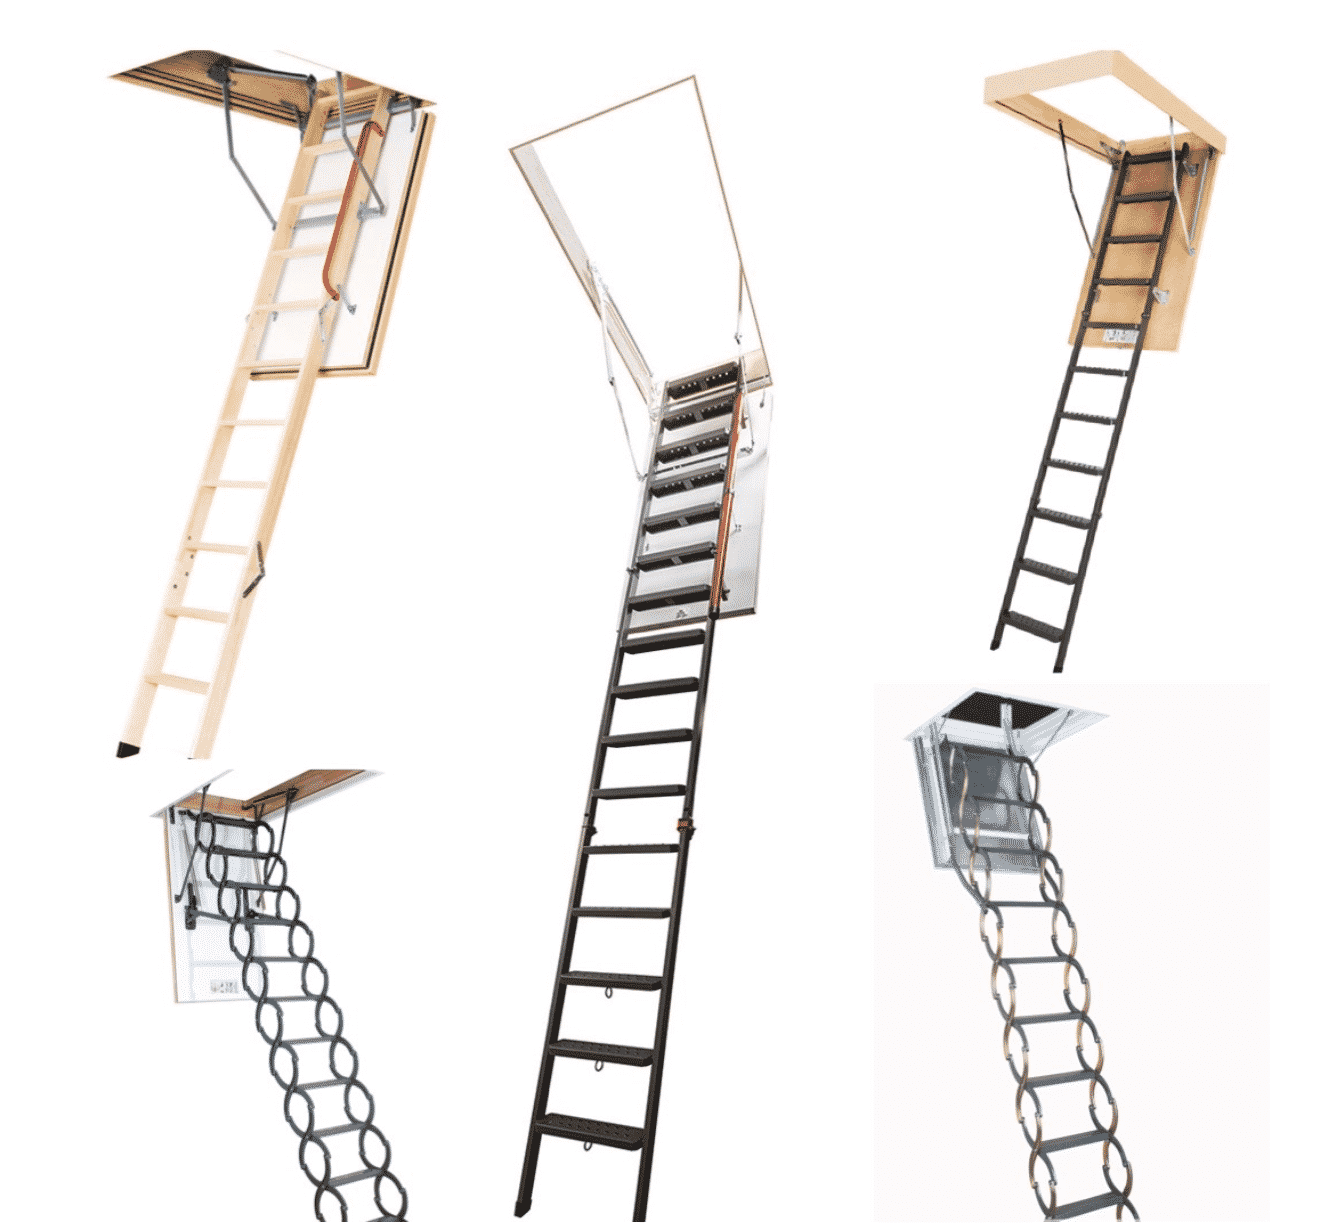 Top 13 Attic Ladders in 2020 (Highest Rated) | FAKRO USA